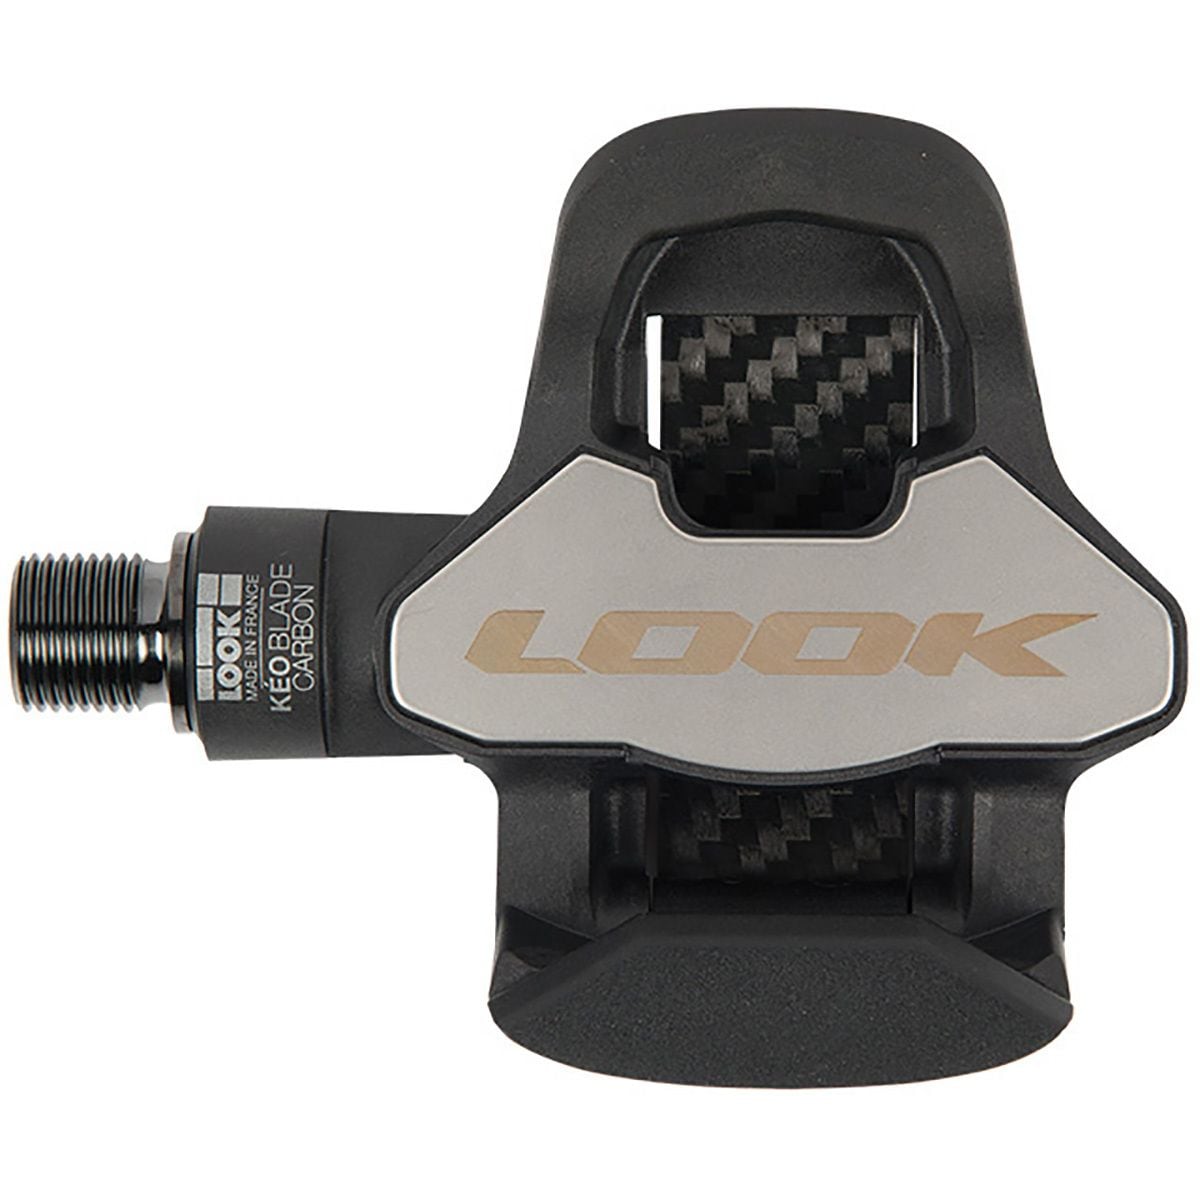 Look Cycle Keo Blade Carbon Ti Road Pedals